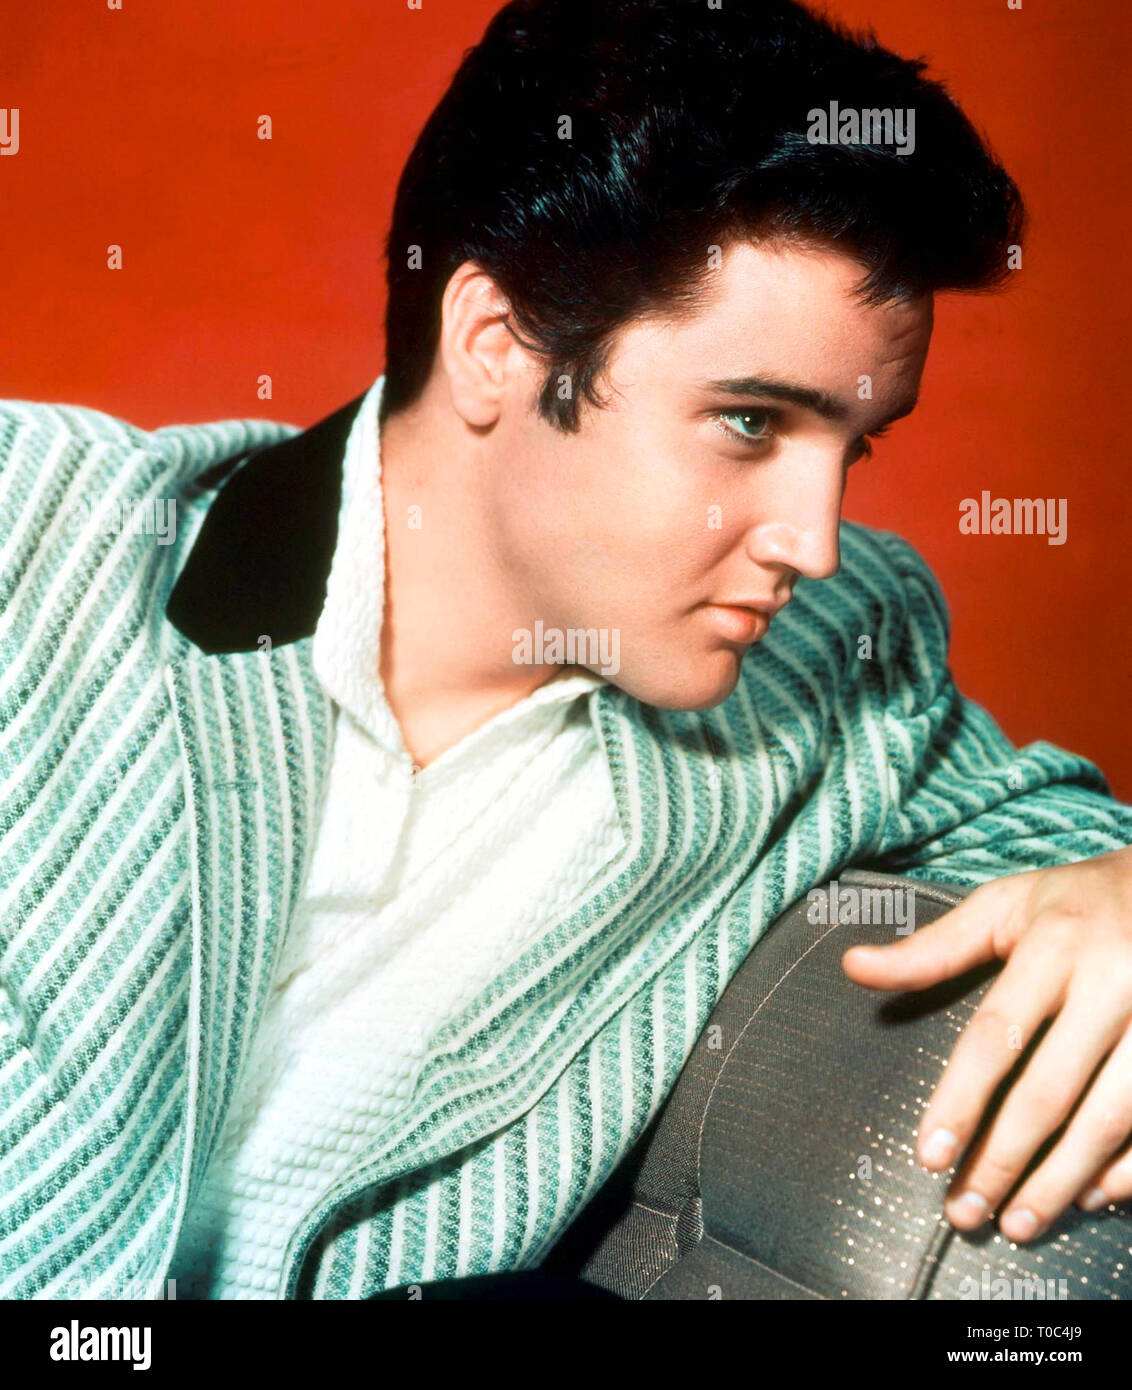 Singer Elvis Presley poses for a studio portrait Credit: Hollywood Photo Archive / MediaPunch Stock Photo